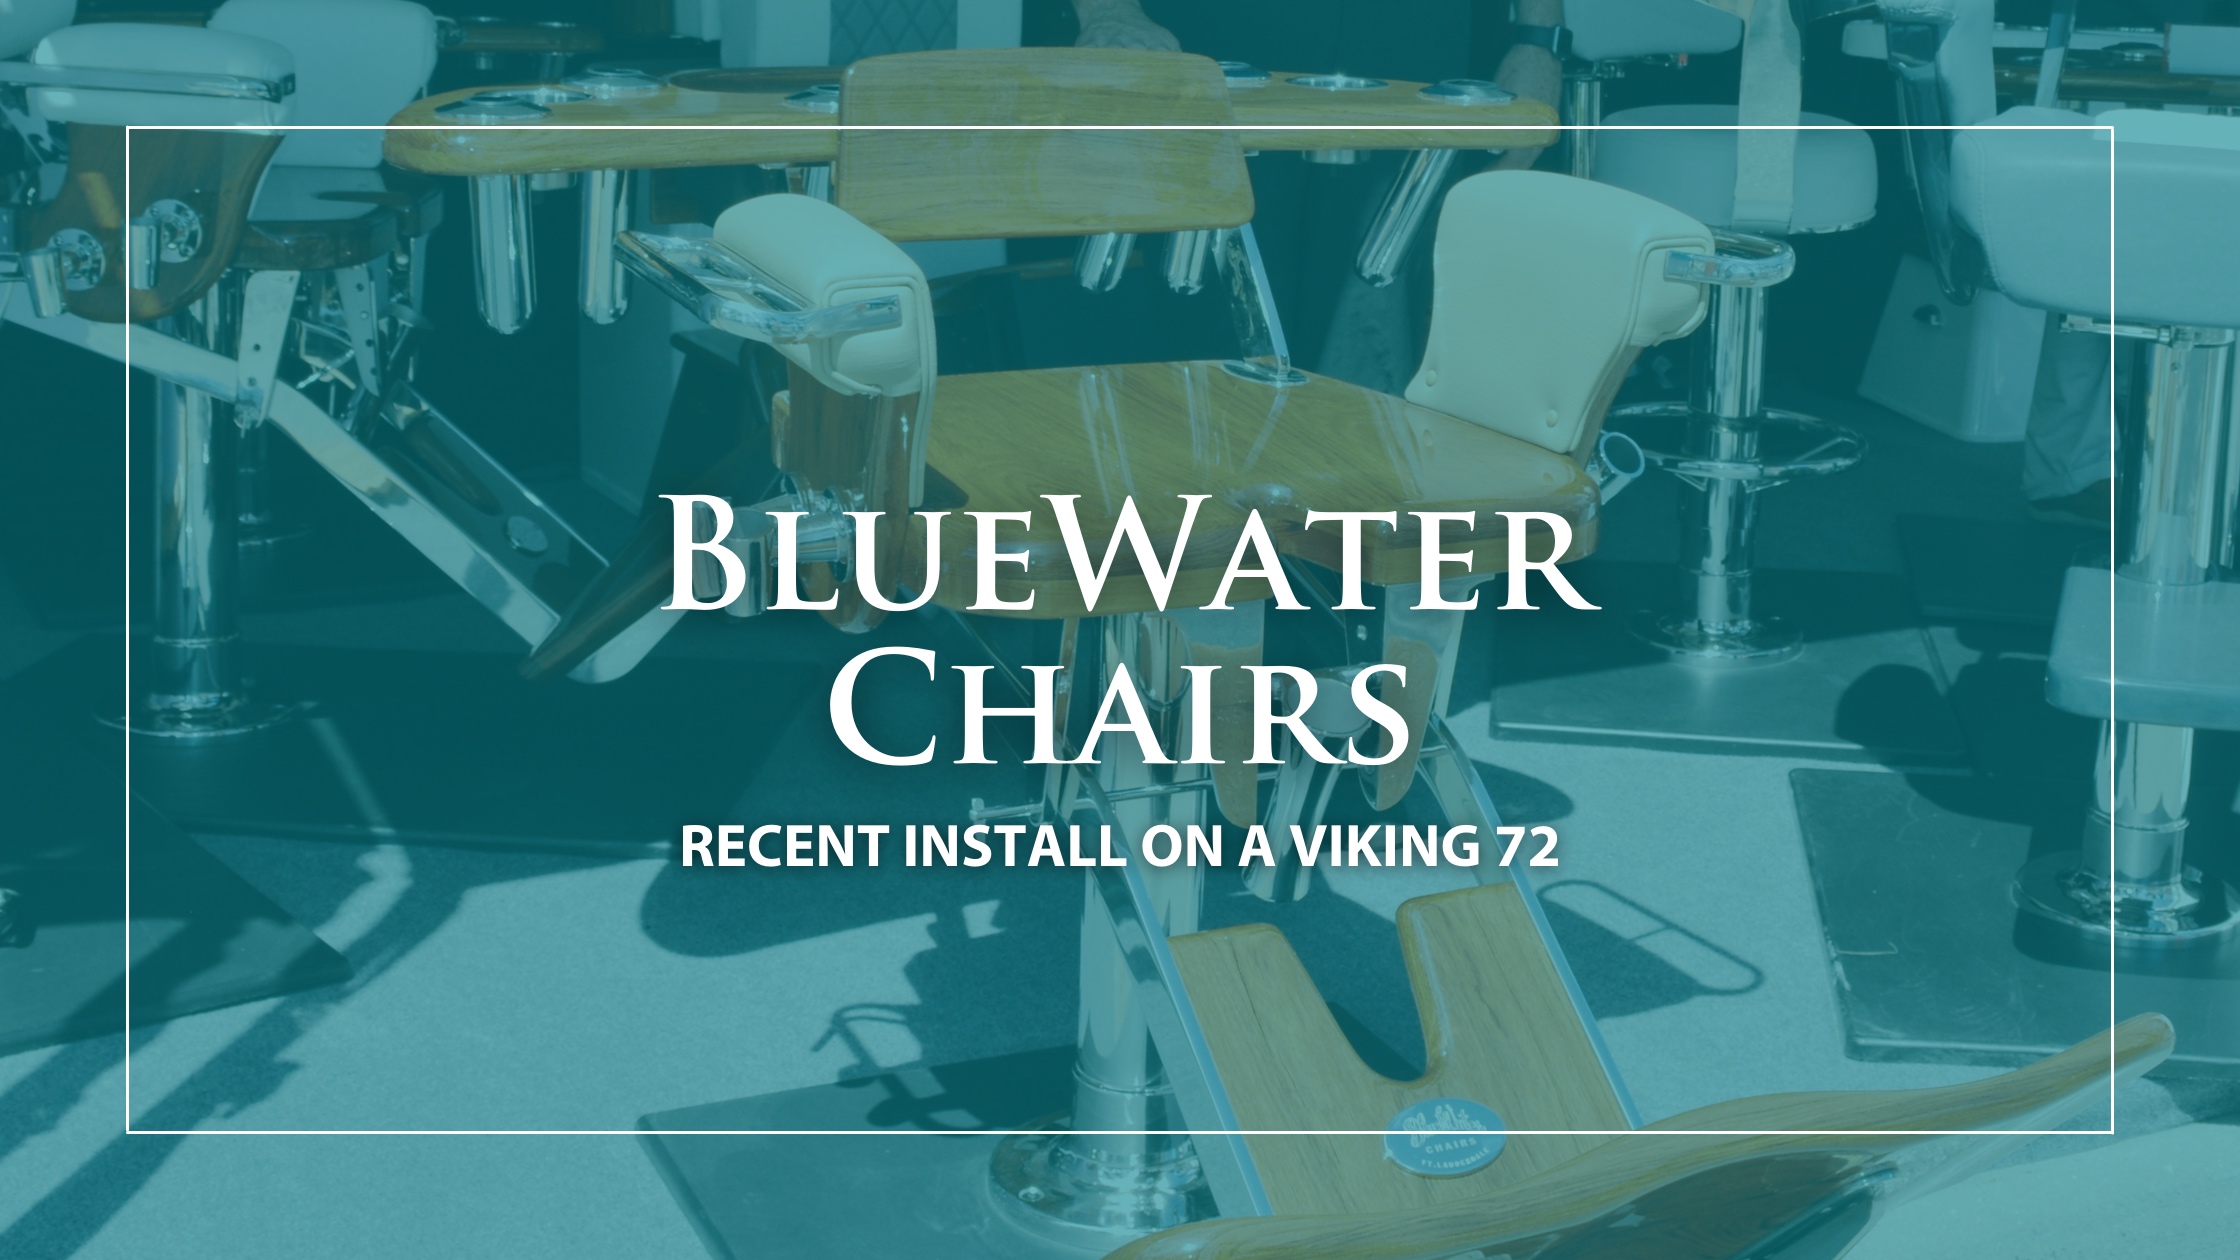 BlueWater Chairs: Recent Install on a Viking 72